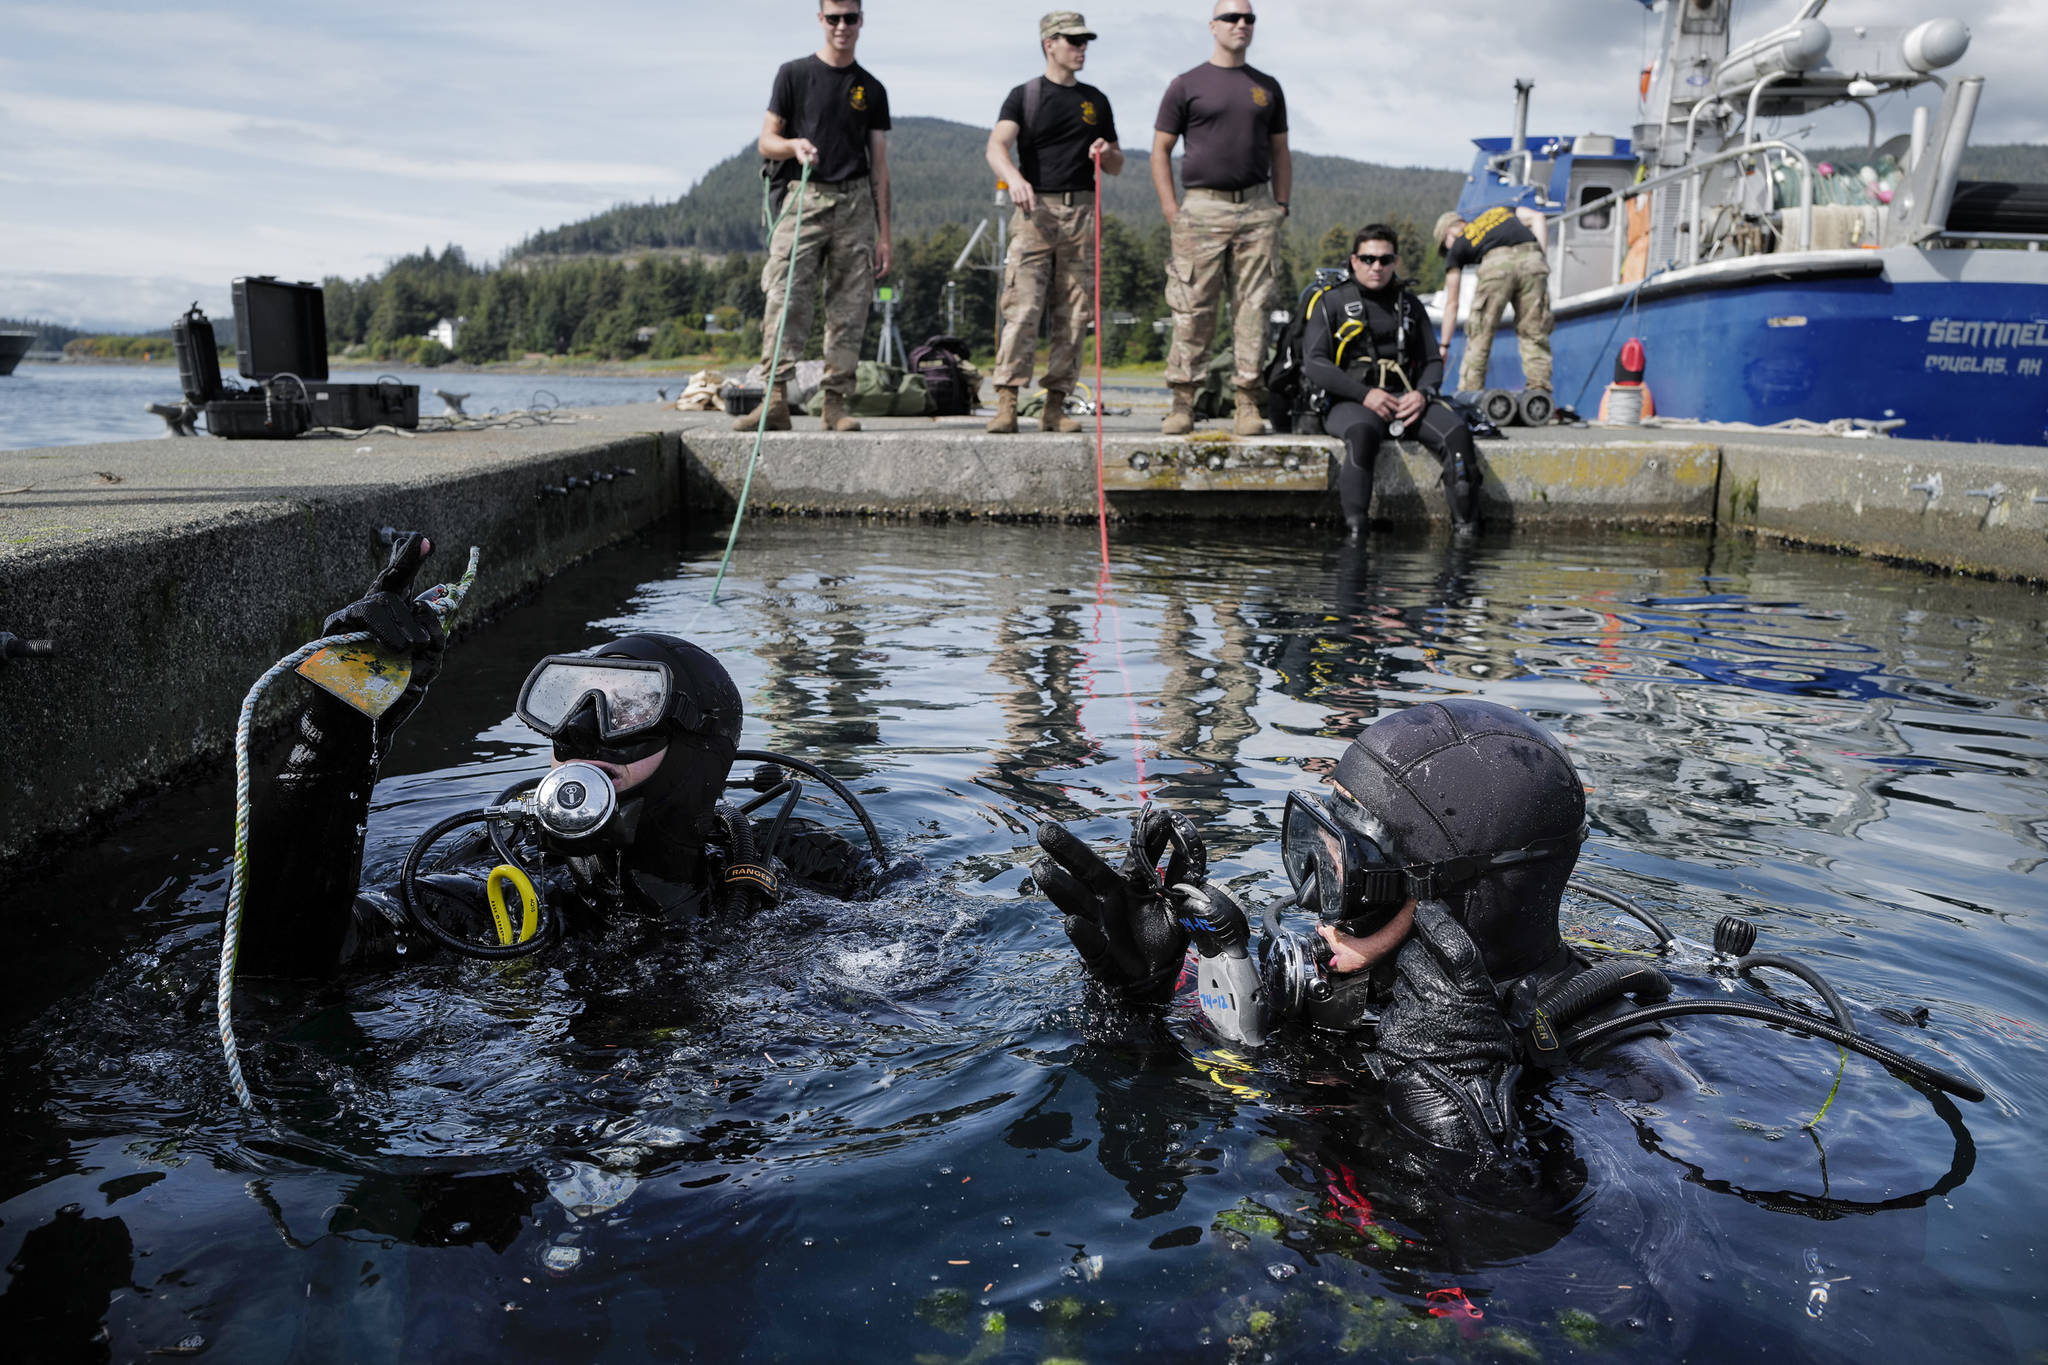 Sgt. Cesar Rodriquez, left, and Sgt. Kenneth Byrd, of the U.S. Army’s 74th Engineer Dive Detachment check their gauges one last time before submerging on a project at the Don D. Statter Boat Harbor in Auke Bay on Friday, Aug. 16, 2019. Members of the U.S. Army’s 74th Engineer Dive Detachment and U.S. Coast Guard Regional Dive Locker West worked together to inspect and replace the bolts holding the harbor’s breakwater together. (Michael Penn | Juneau Empire)